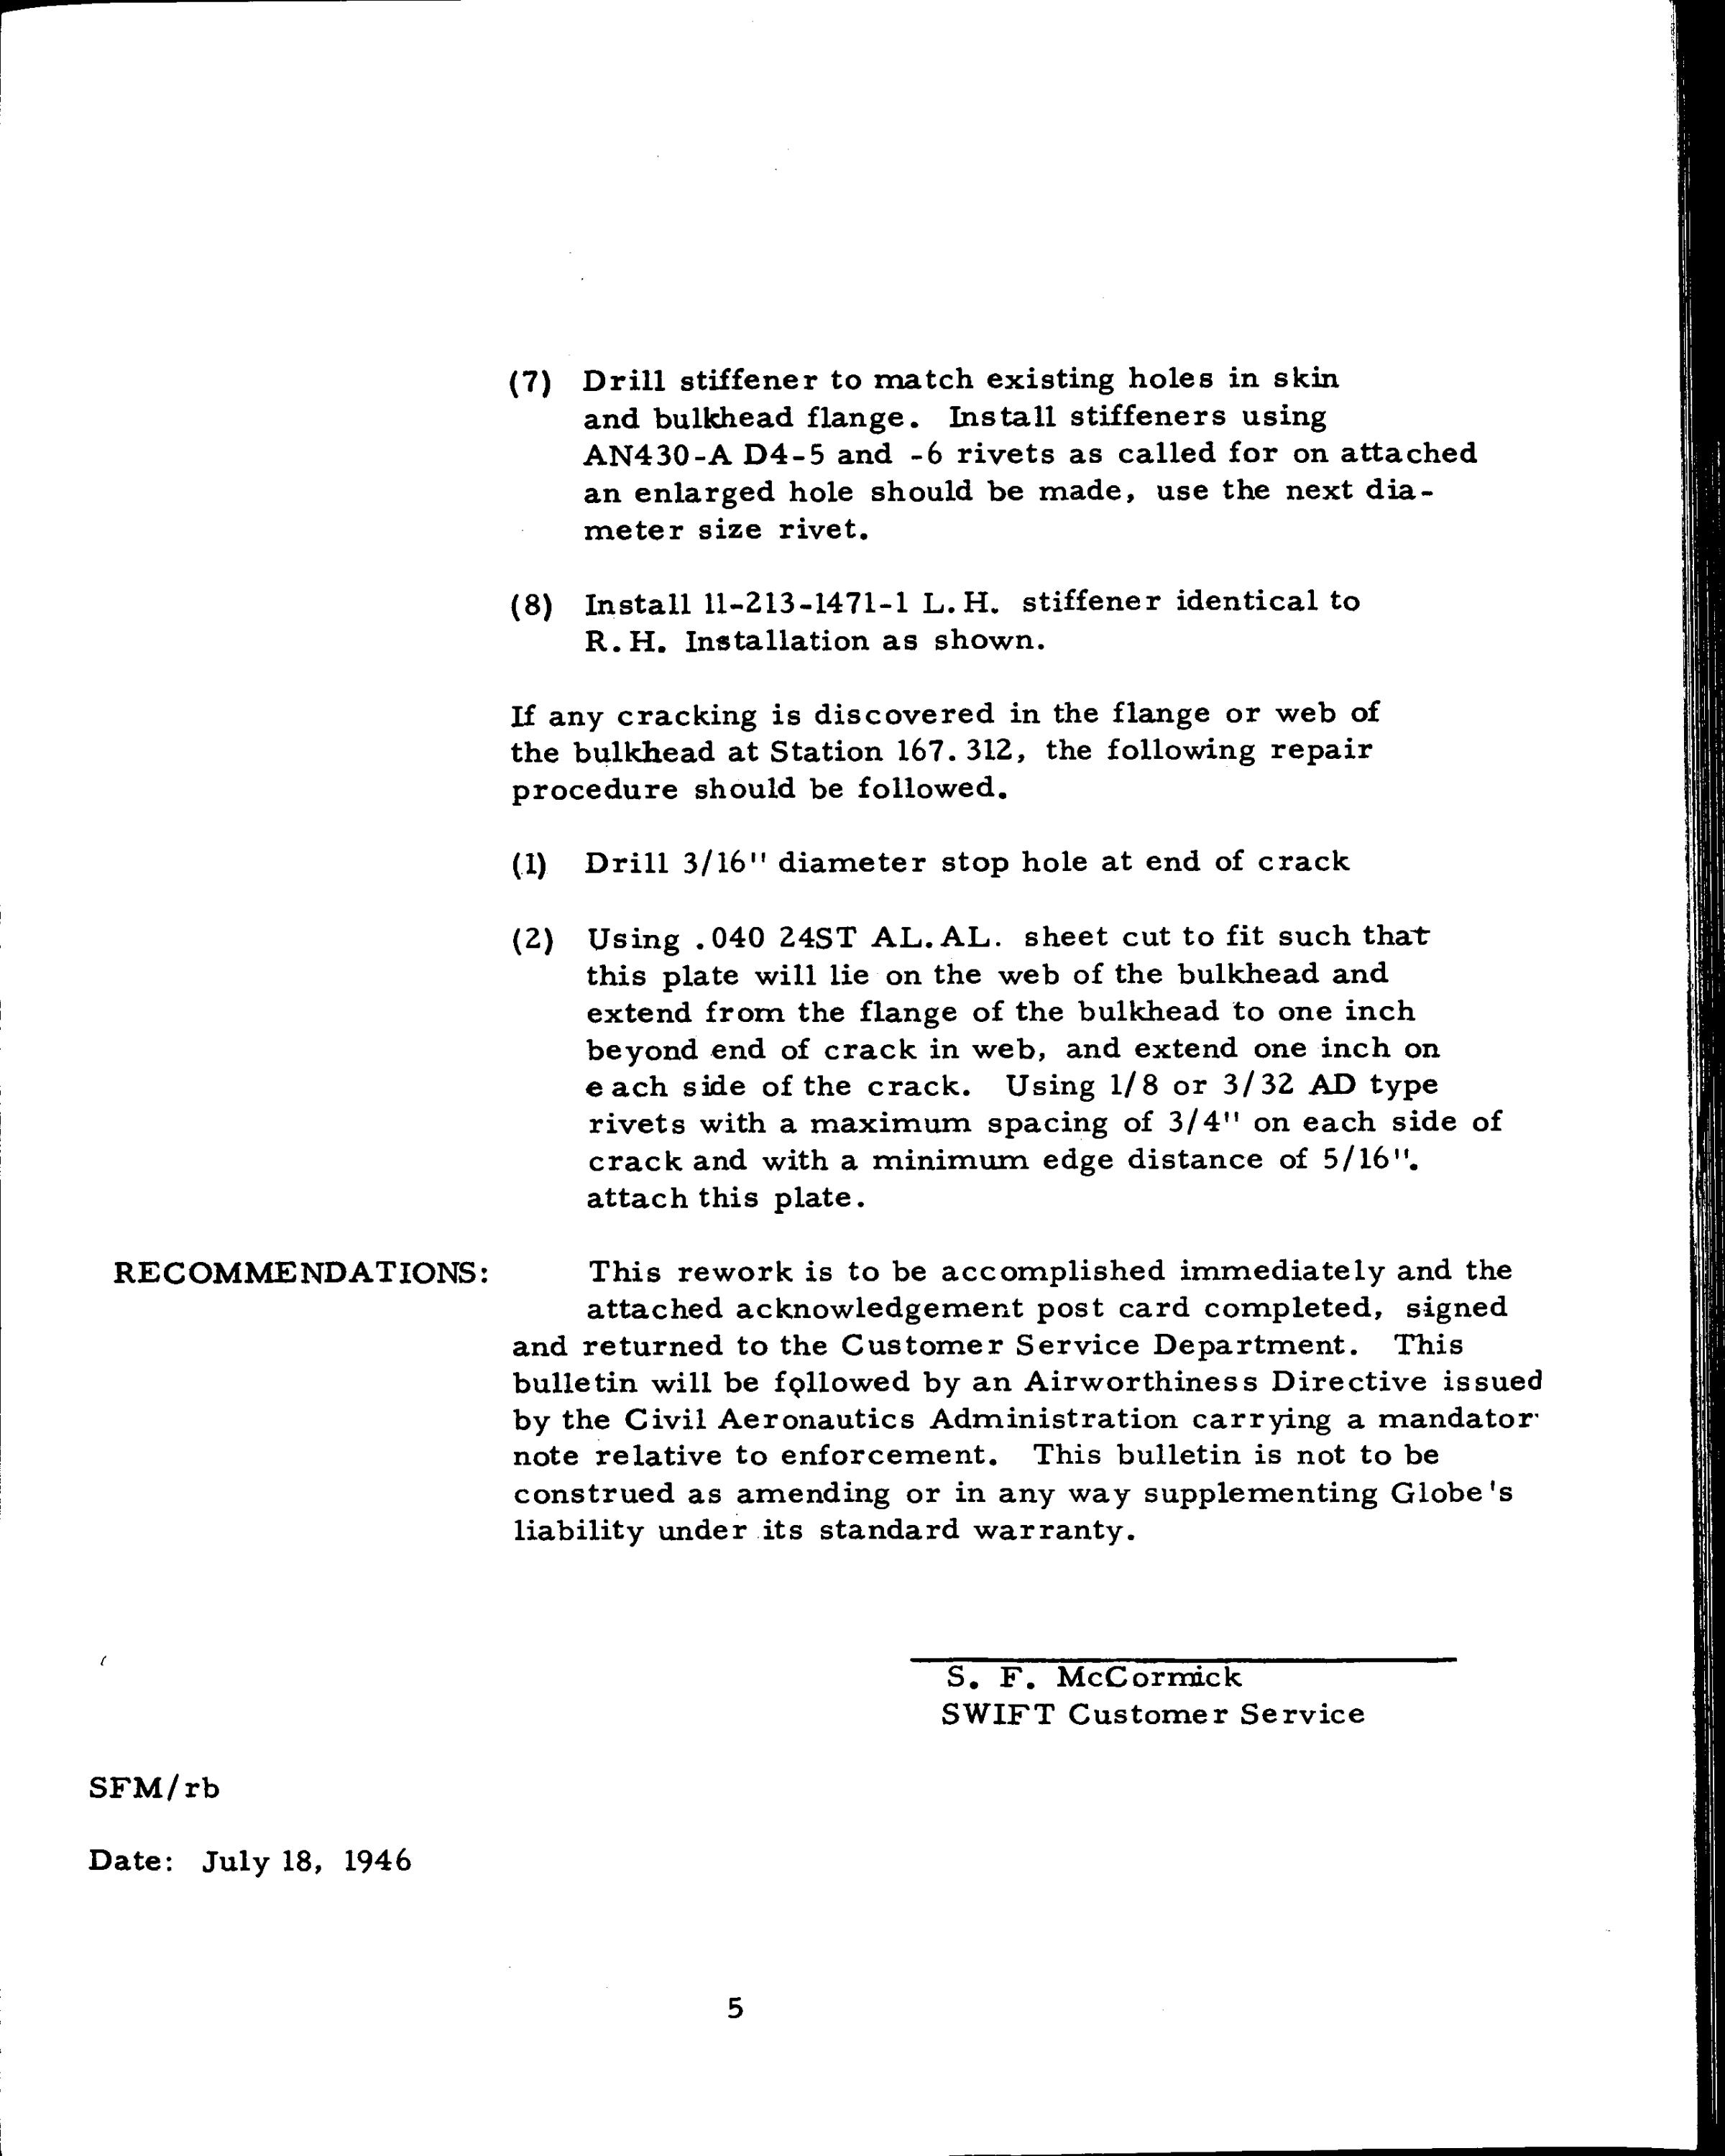 Sample page 9 from AirCorps Library document: Customer Service Maintenance Bulletins